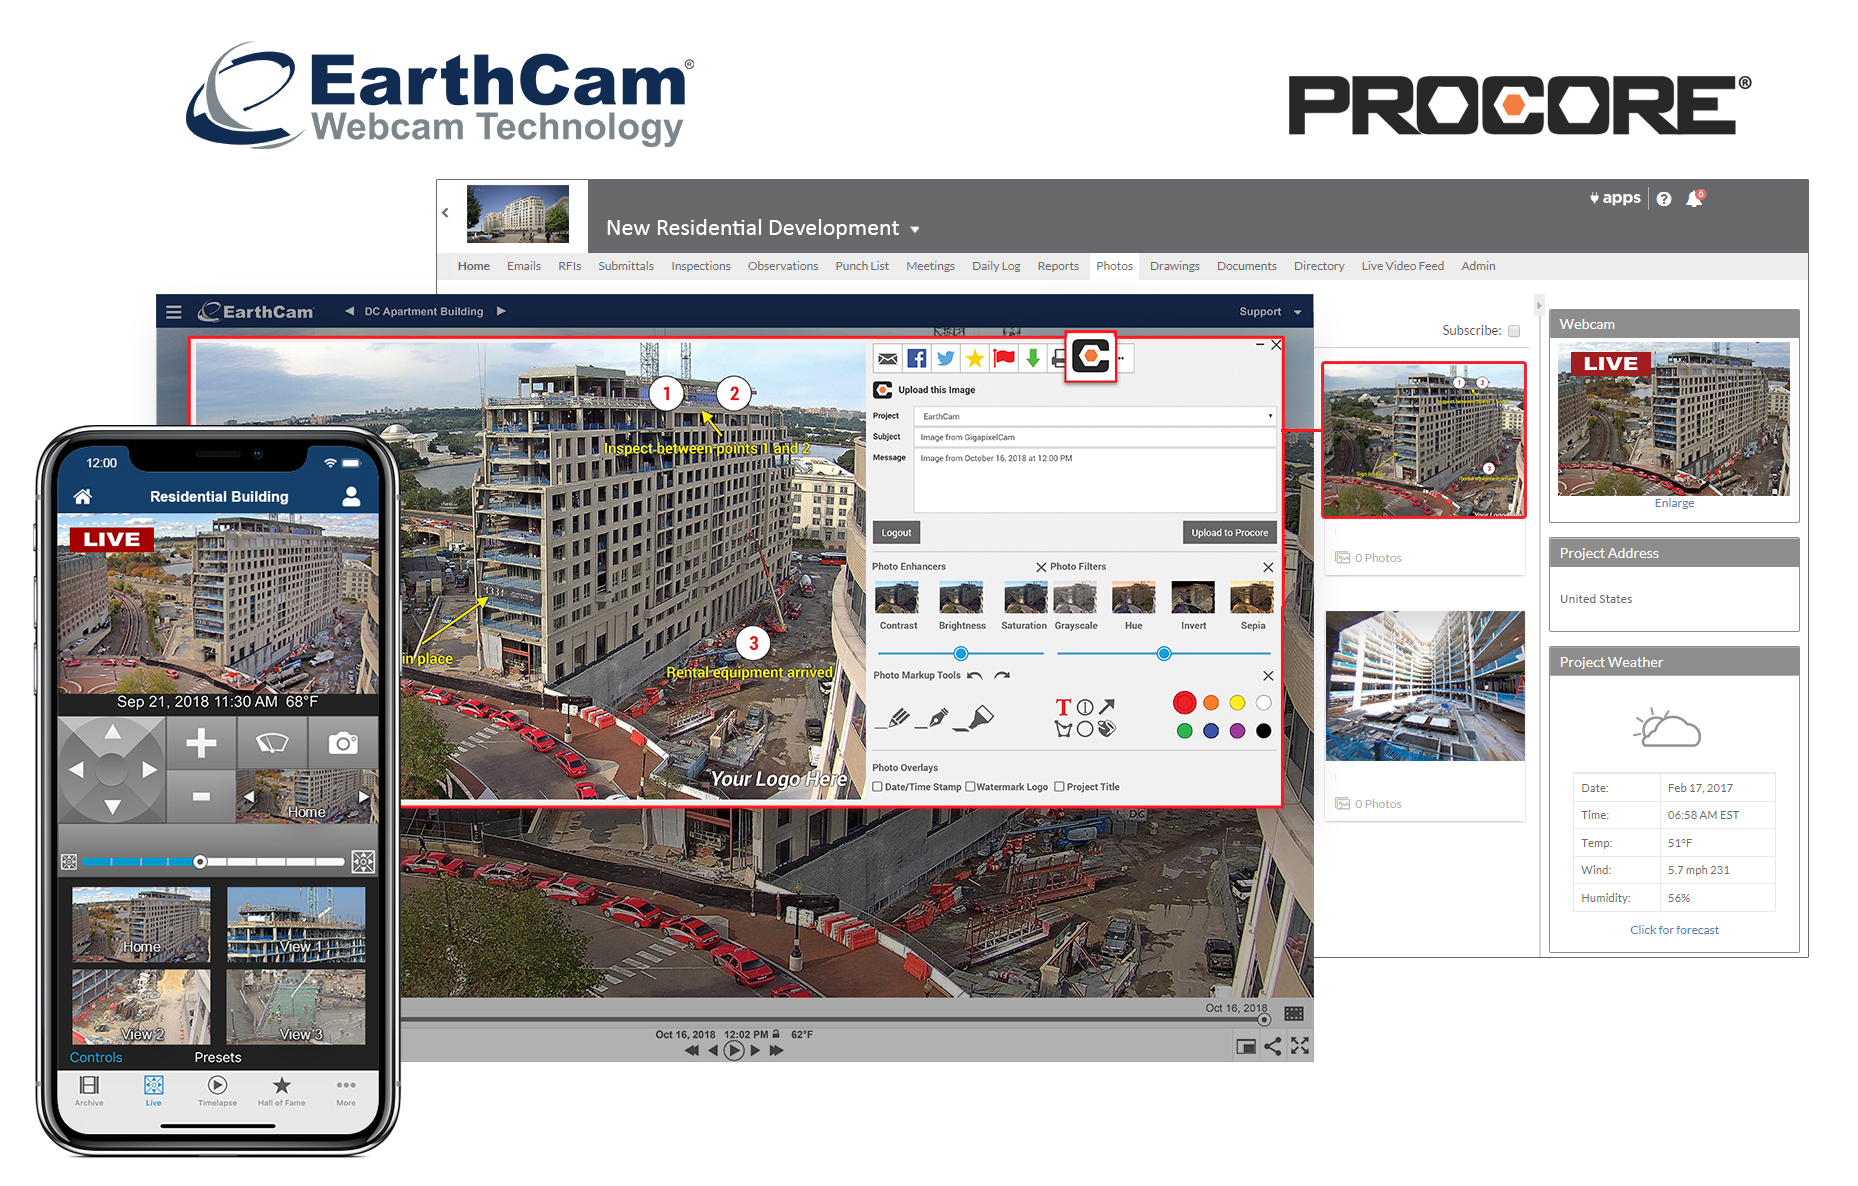 EarthCam's Procore integration continues to deliver valuable visual information for a successful project management process.